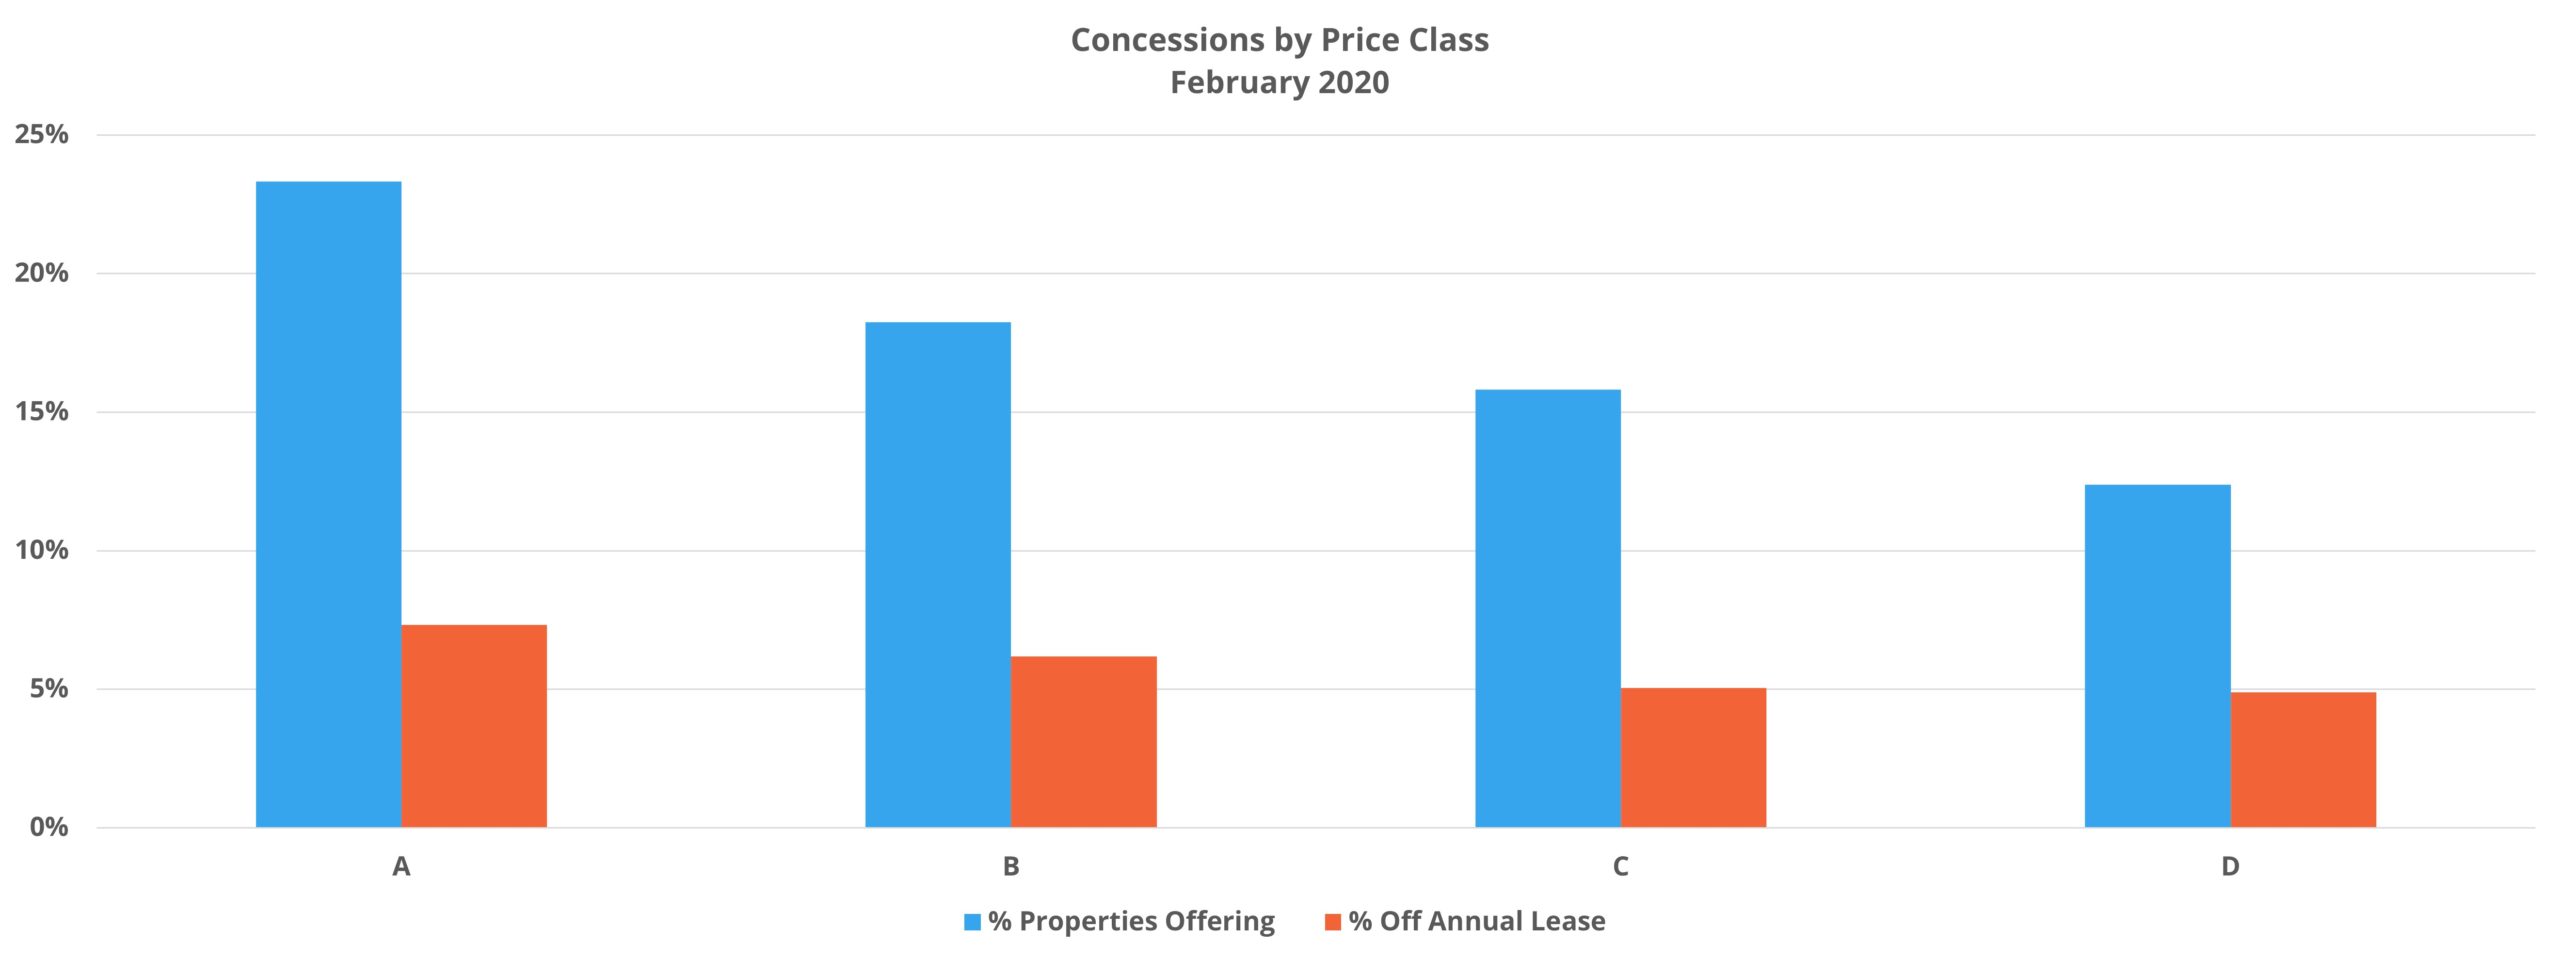 Concessions by Price Class